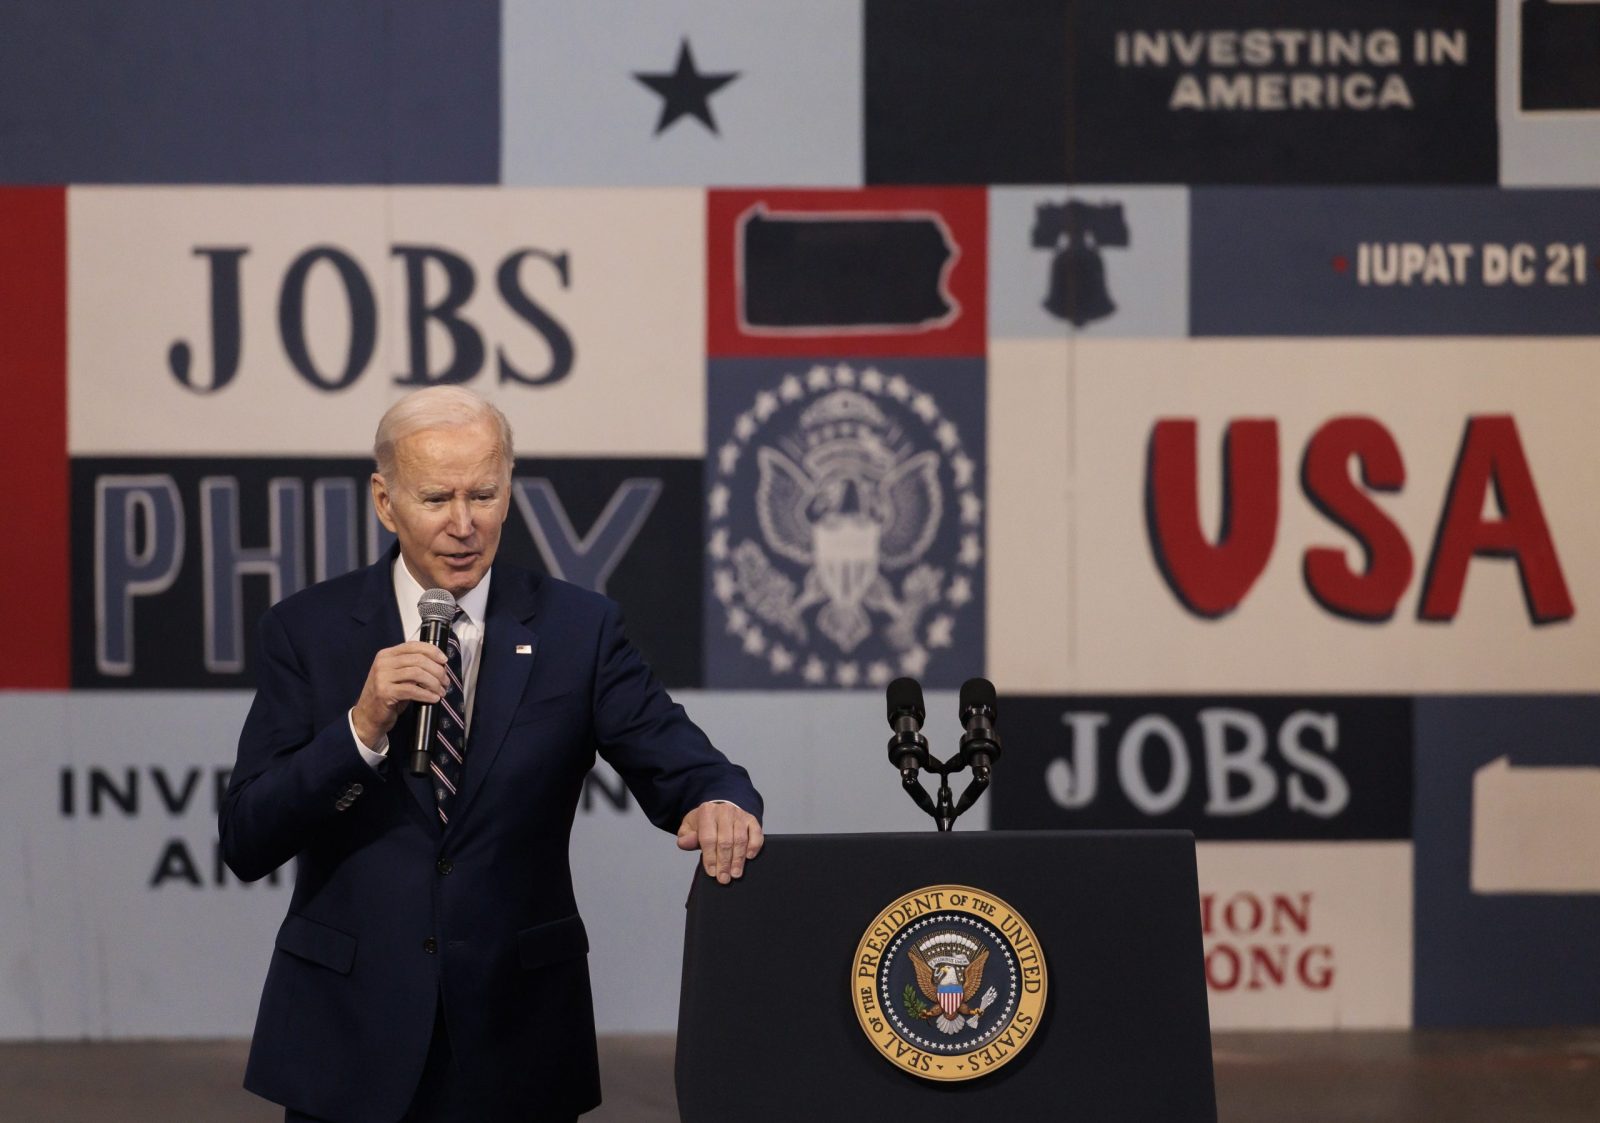 epa10512362 US President Joe Biden speaks about his administration's budget proposals during an event at the Finishing Trades Institute in Philadelphia, Pennsylvania, USA, 09 March 2023.  EPA/JUSTIN LANE